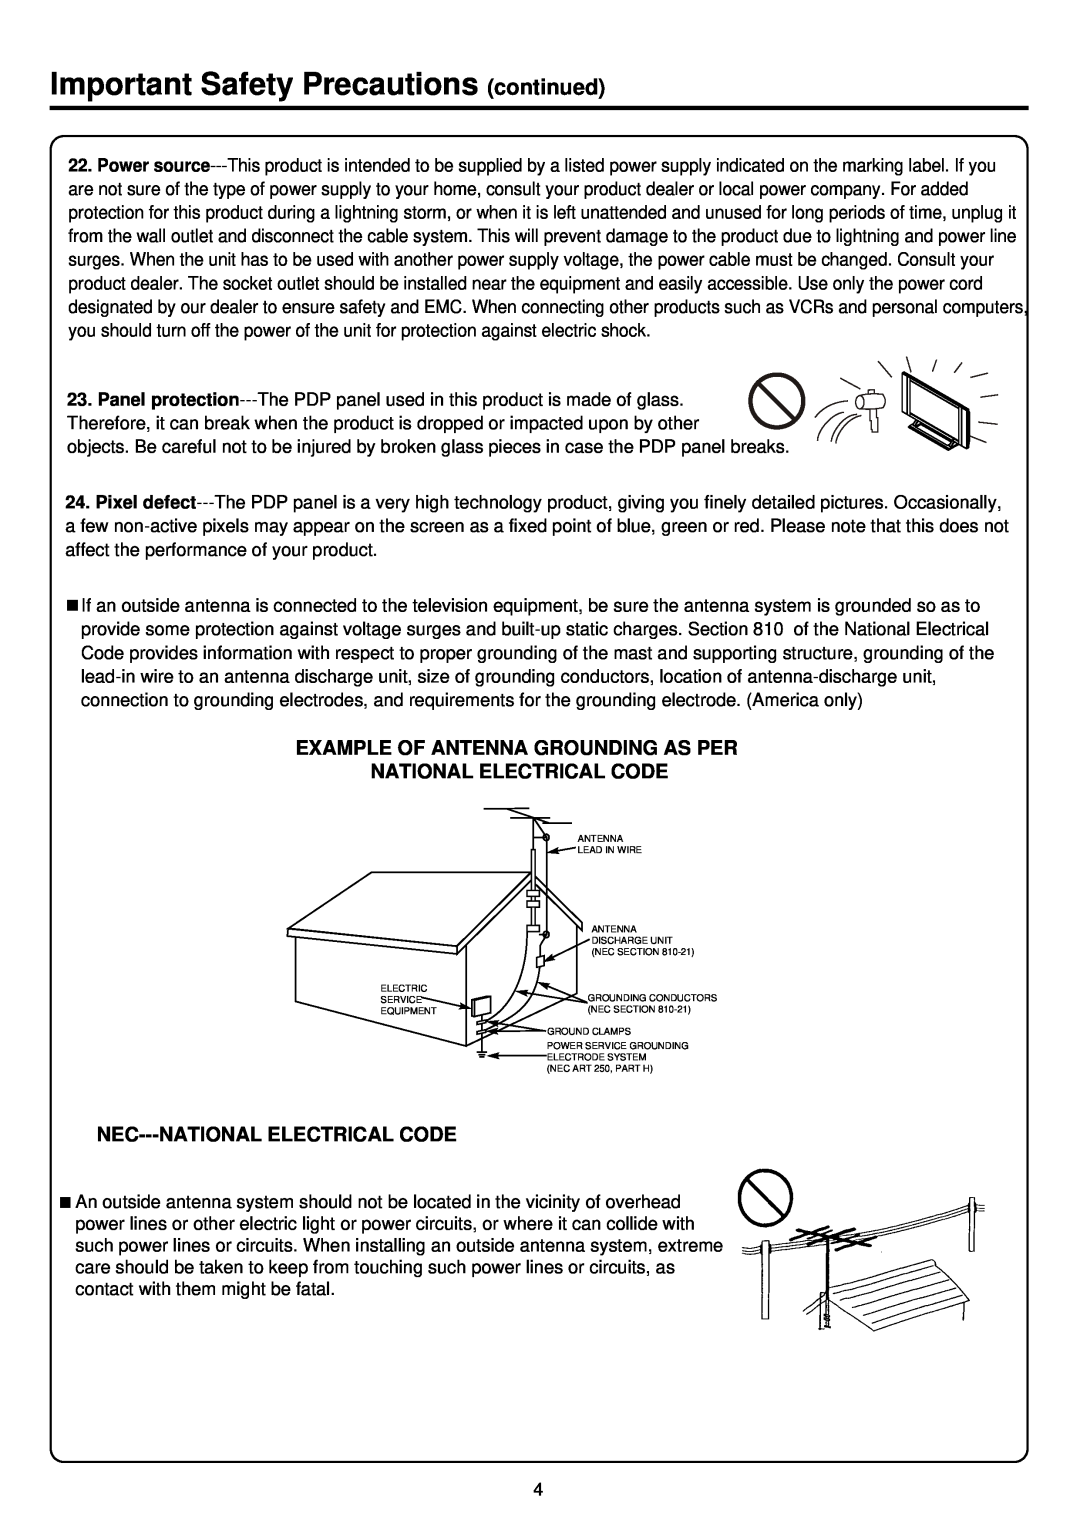 Palsonic PDP4200 Example Of Antenna Grounding As Per National Electrical Code, Nec---National Electrical Code, Service 